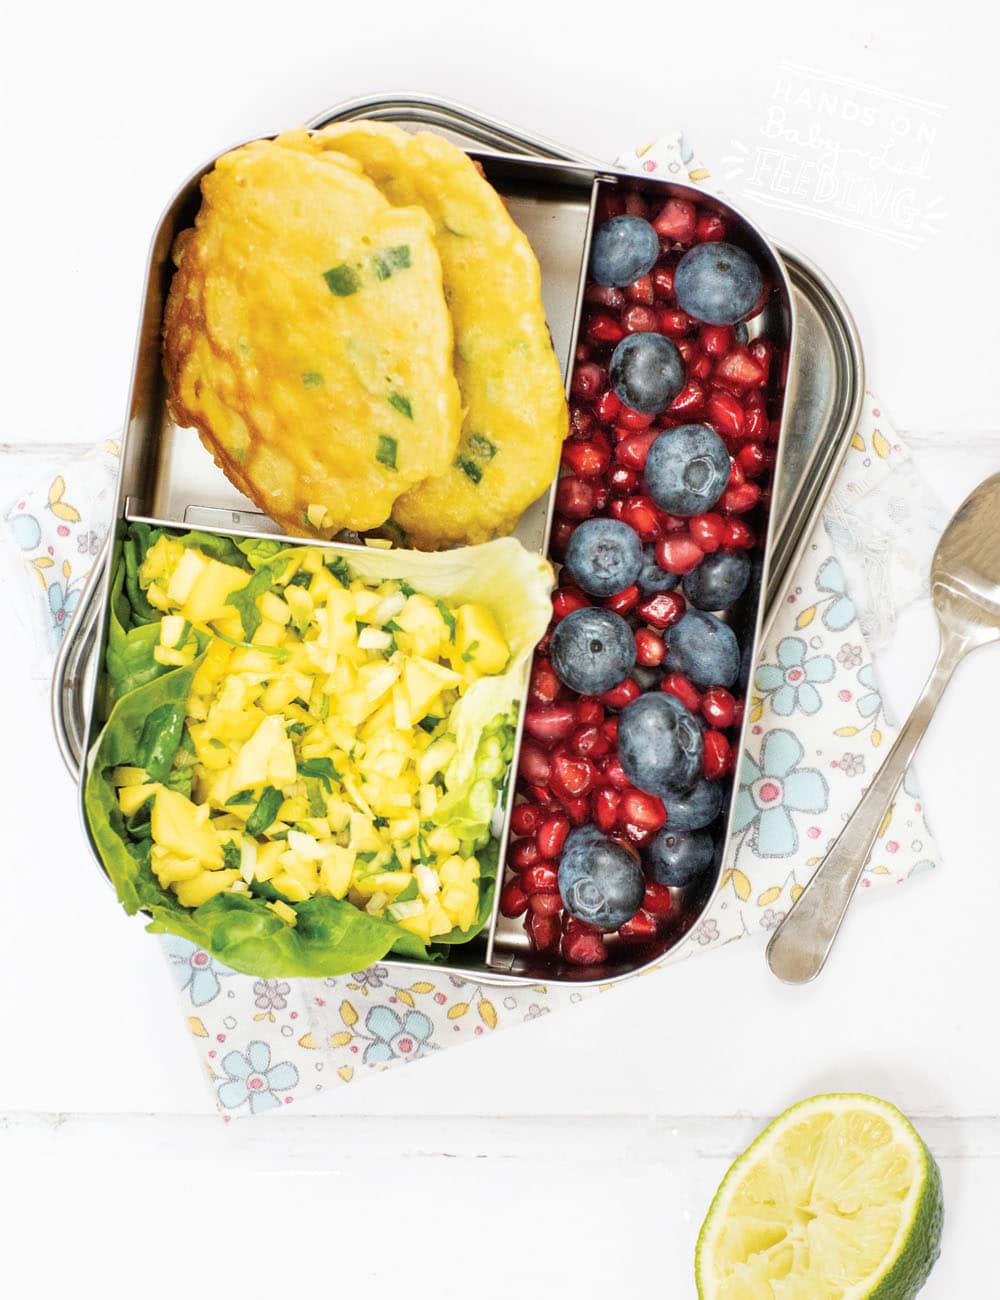 Sweetcorn Fritters with EASY Mango Salsa is one of the easiest lunchbox ideas you'll add to your bento box! Made with common kitchen ingredients and simple steps. This easy healthy finger food is super for picky eaters, toddlers, kids, and baby led weaning! #fingerfood #lunchbox #bentobox #backtoschool #fritters